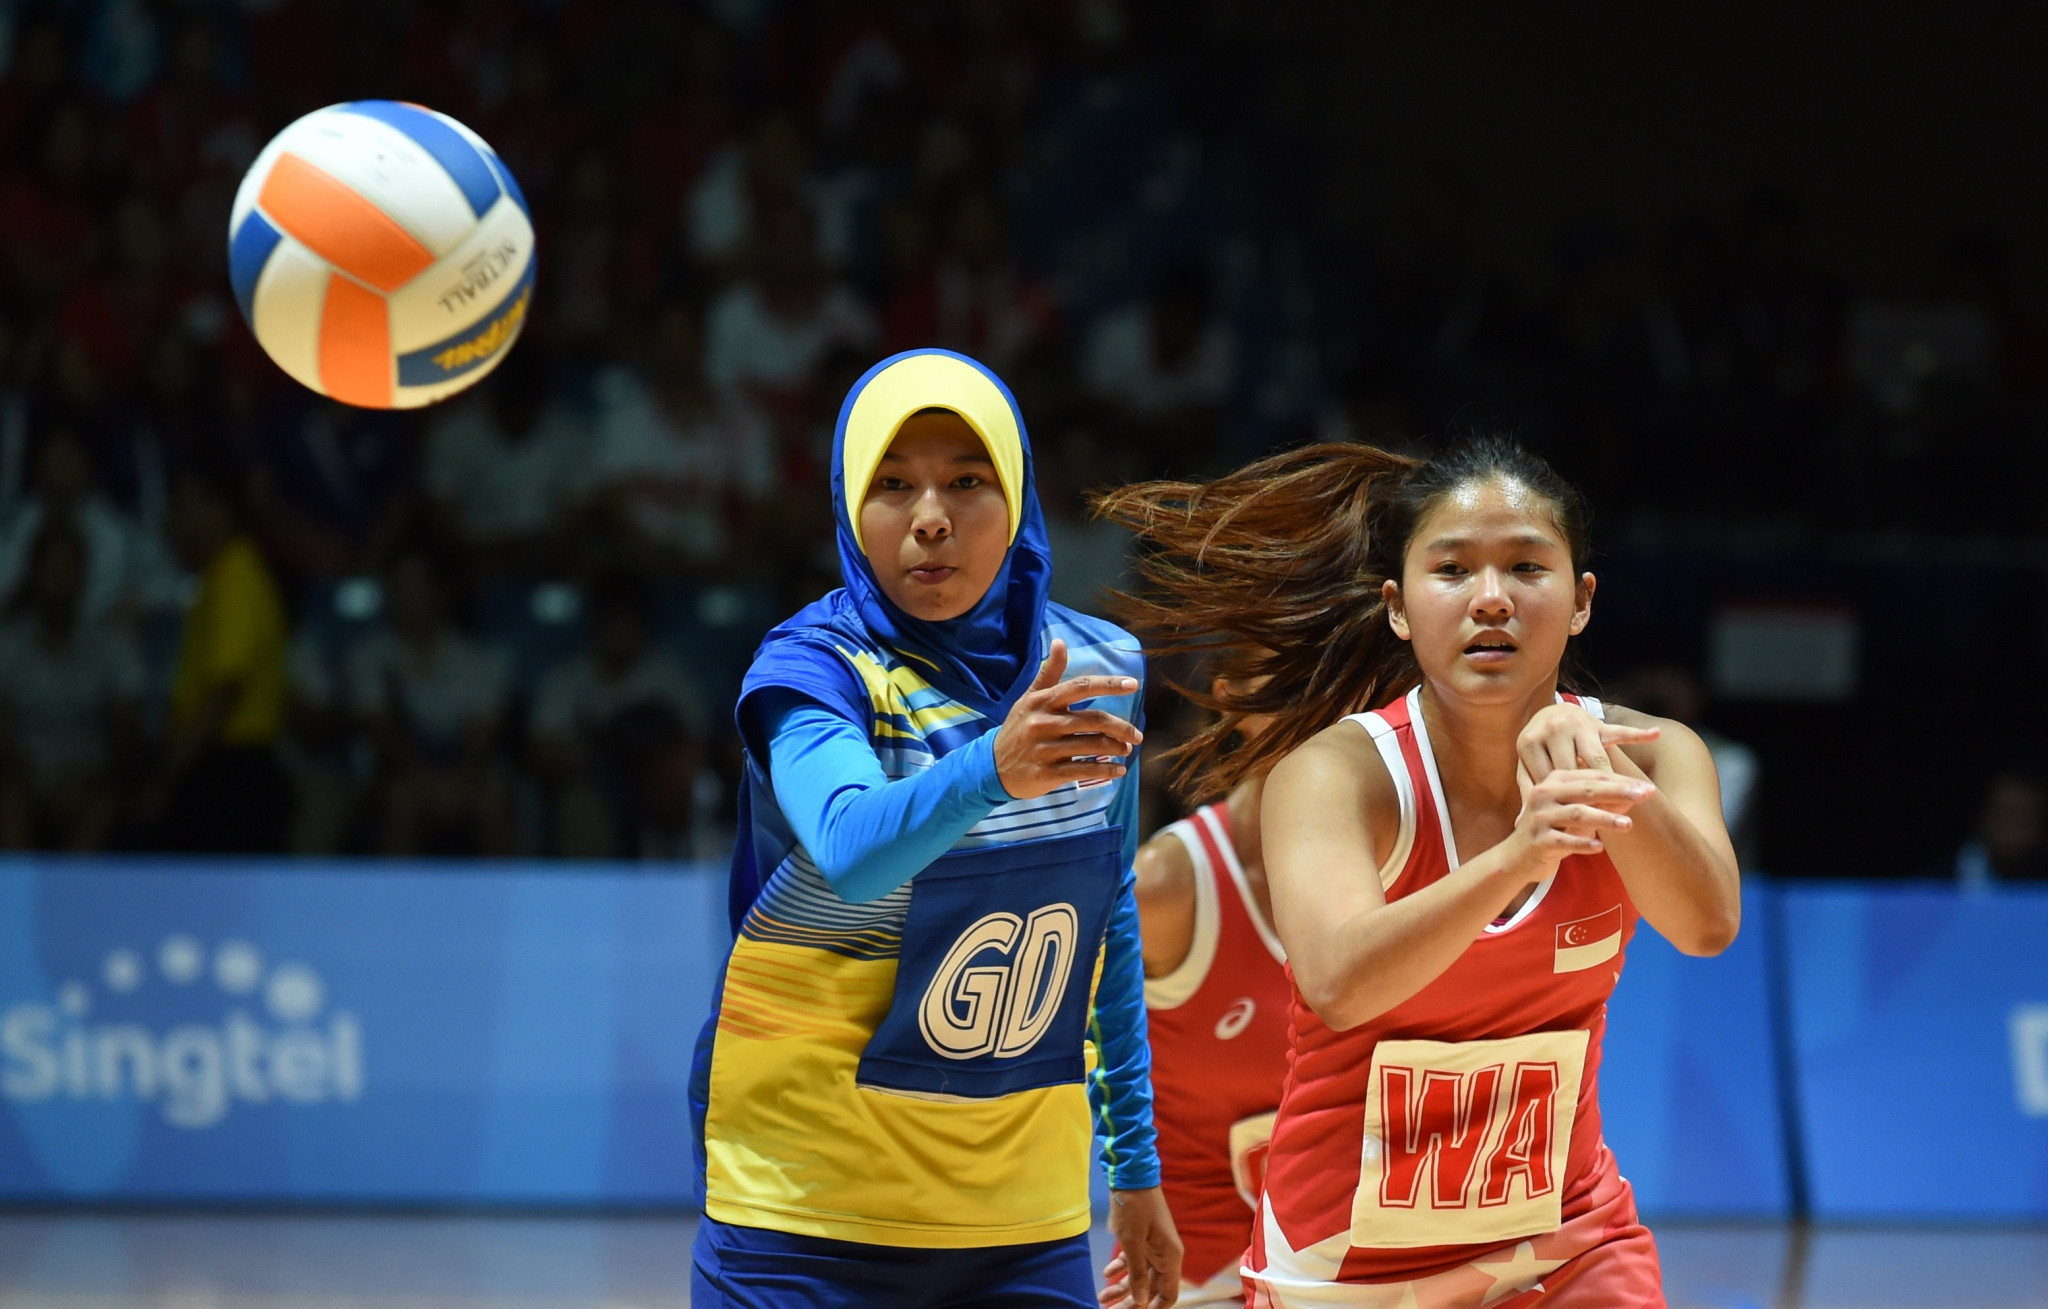 Malaysia's netball team are so far unbeaten in the tournament ©Getty Images